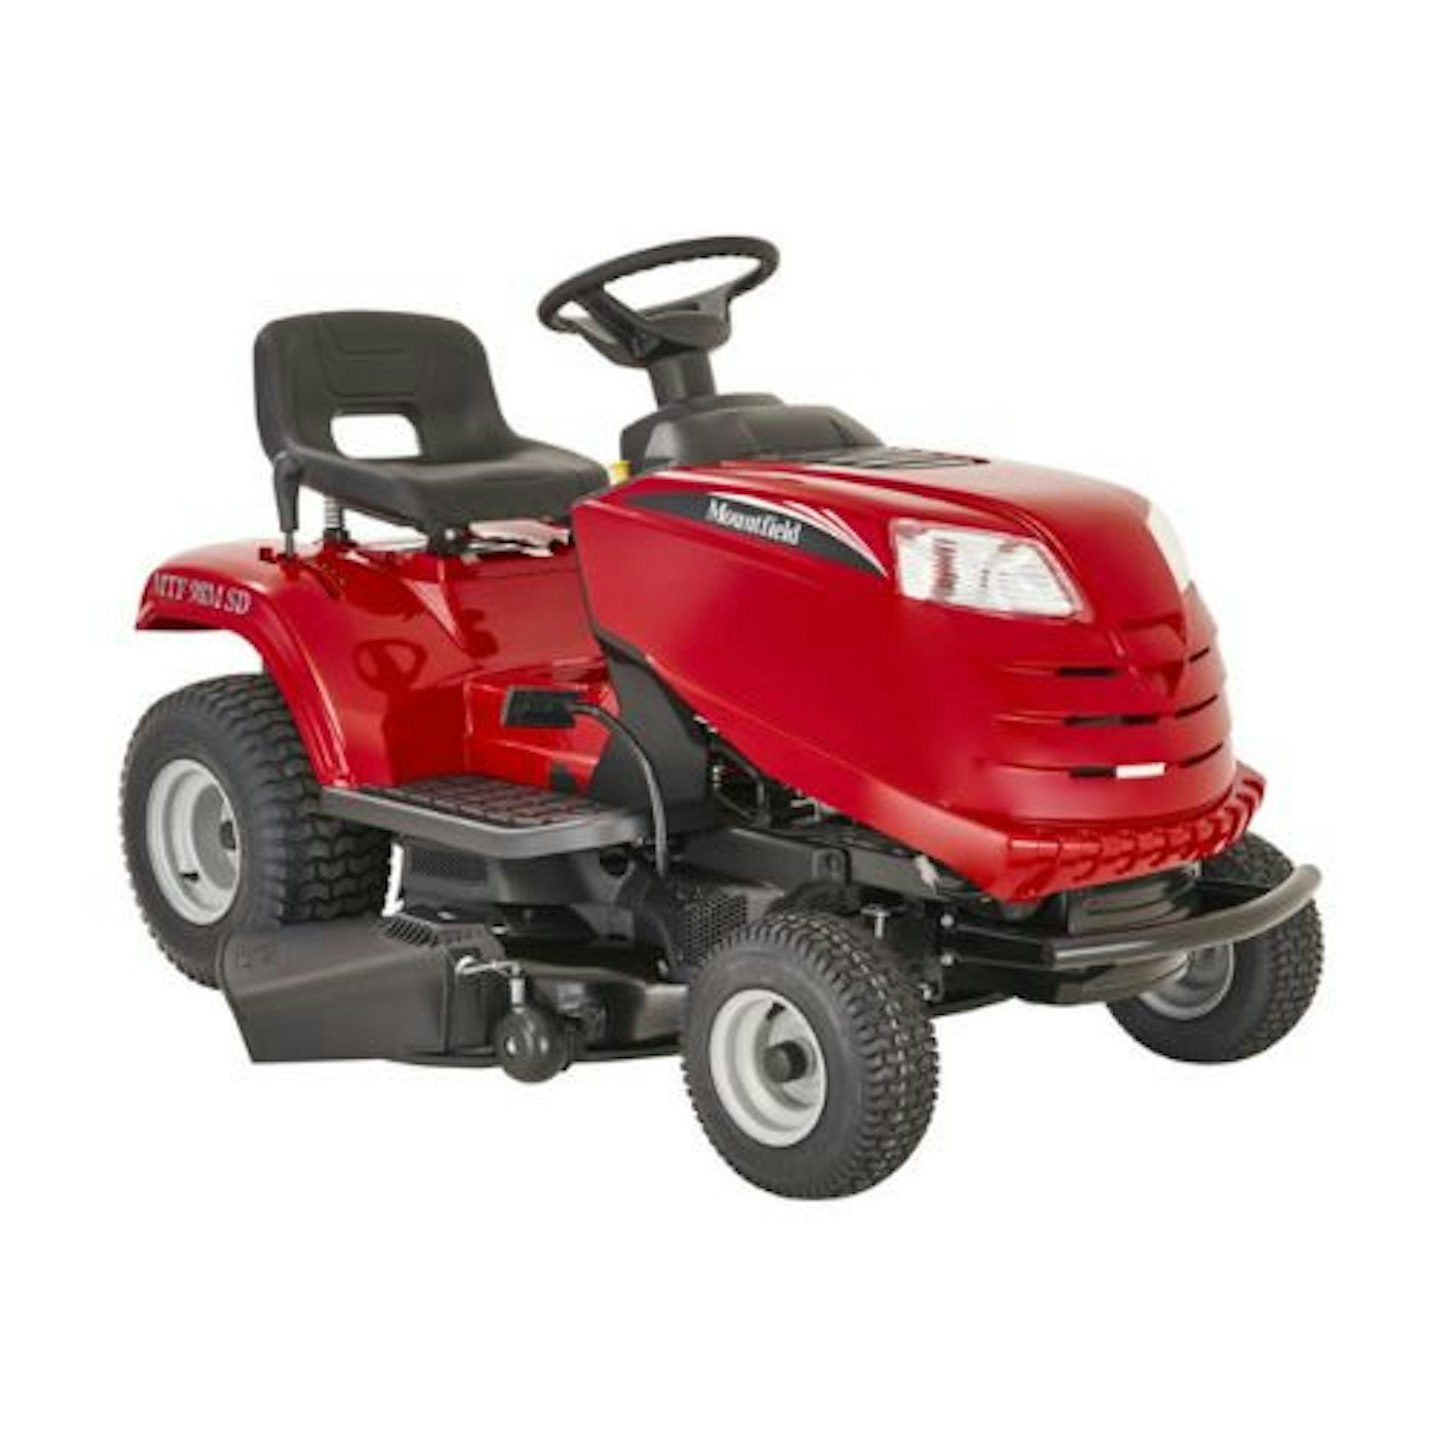 Mountfield MTF 98M-SD Side-Discharge Lawn Tractor